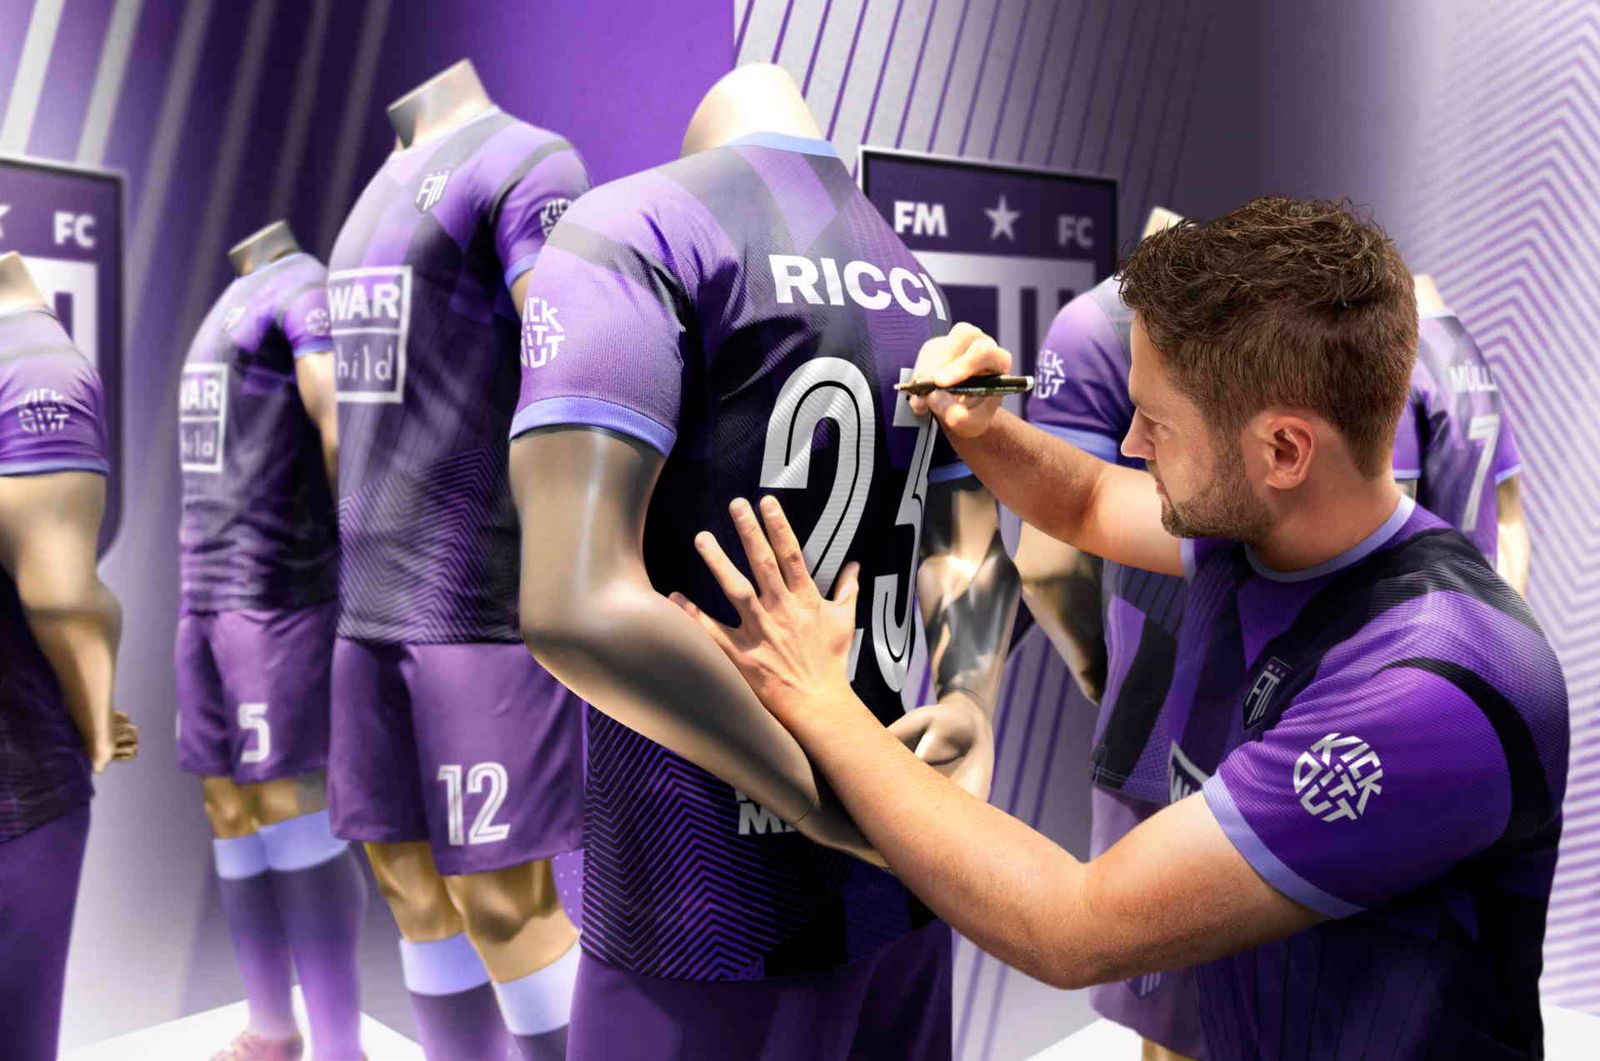 A Football Manager 23 player signing the back of a football shirt.